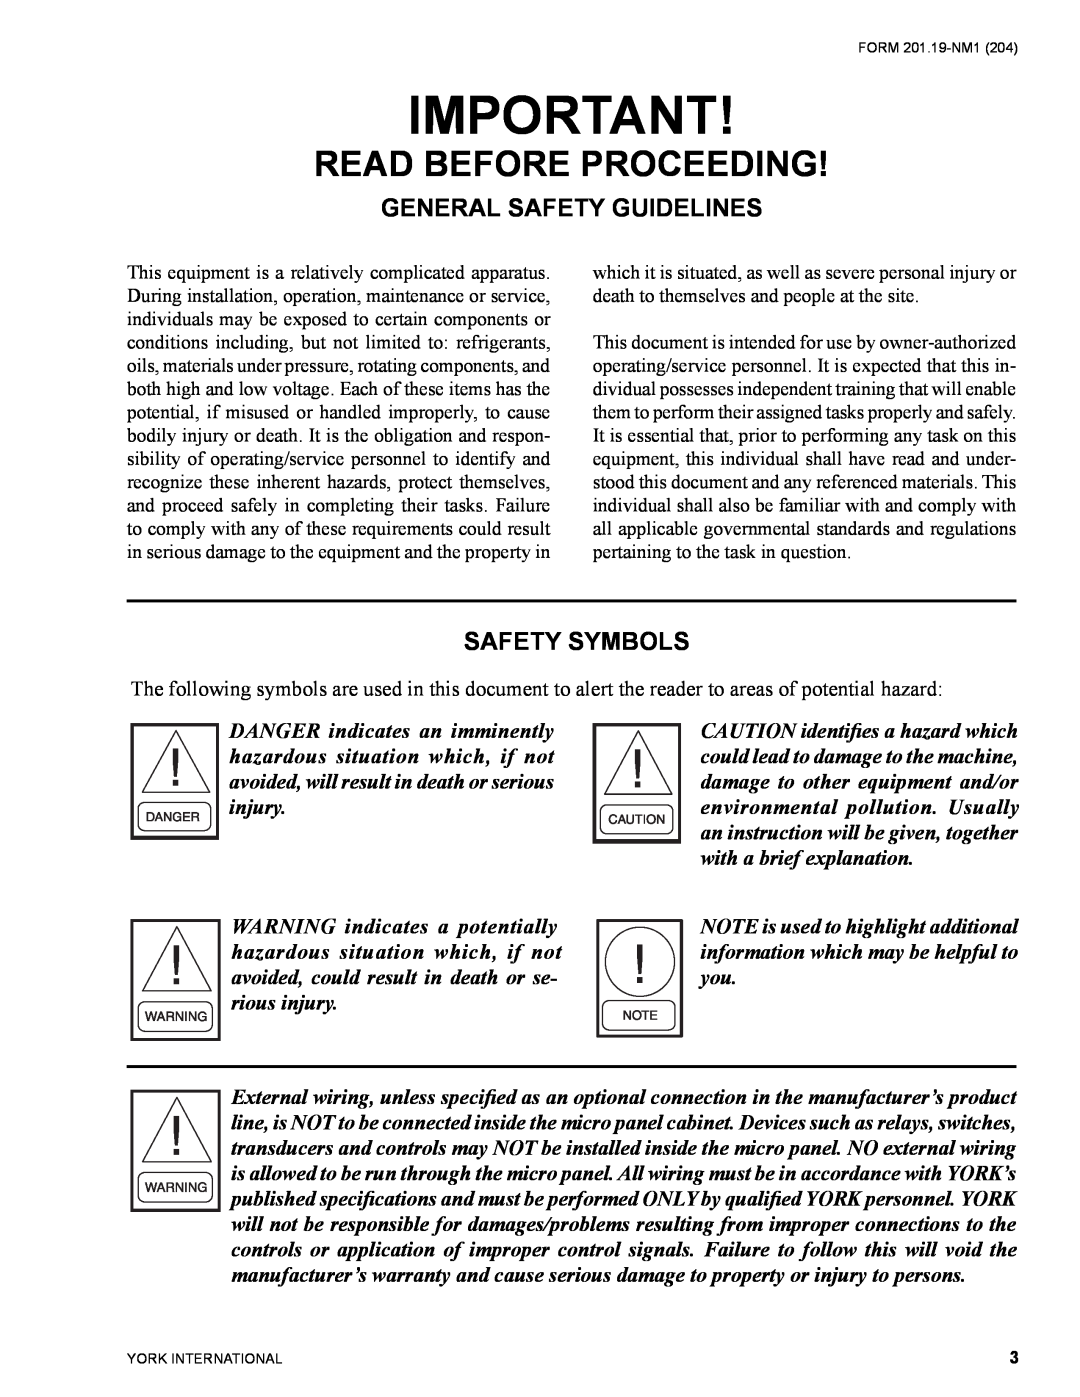 York YCAS0130 manual General Safety Guidelines, Safety Symbols, Read Before Proceeding 